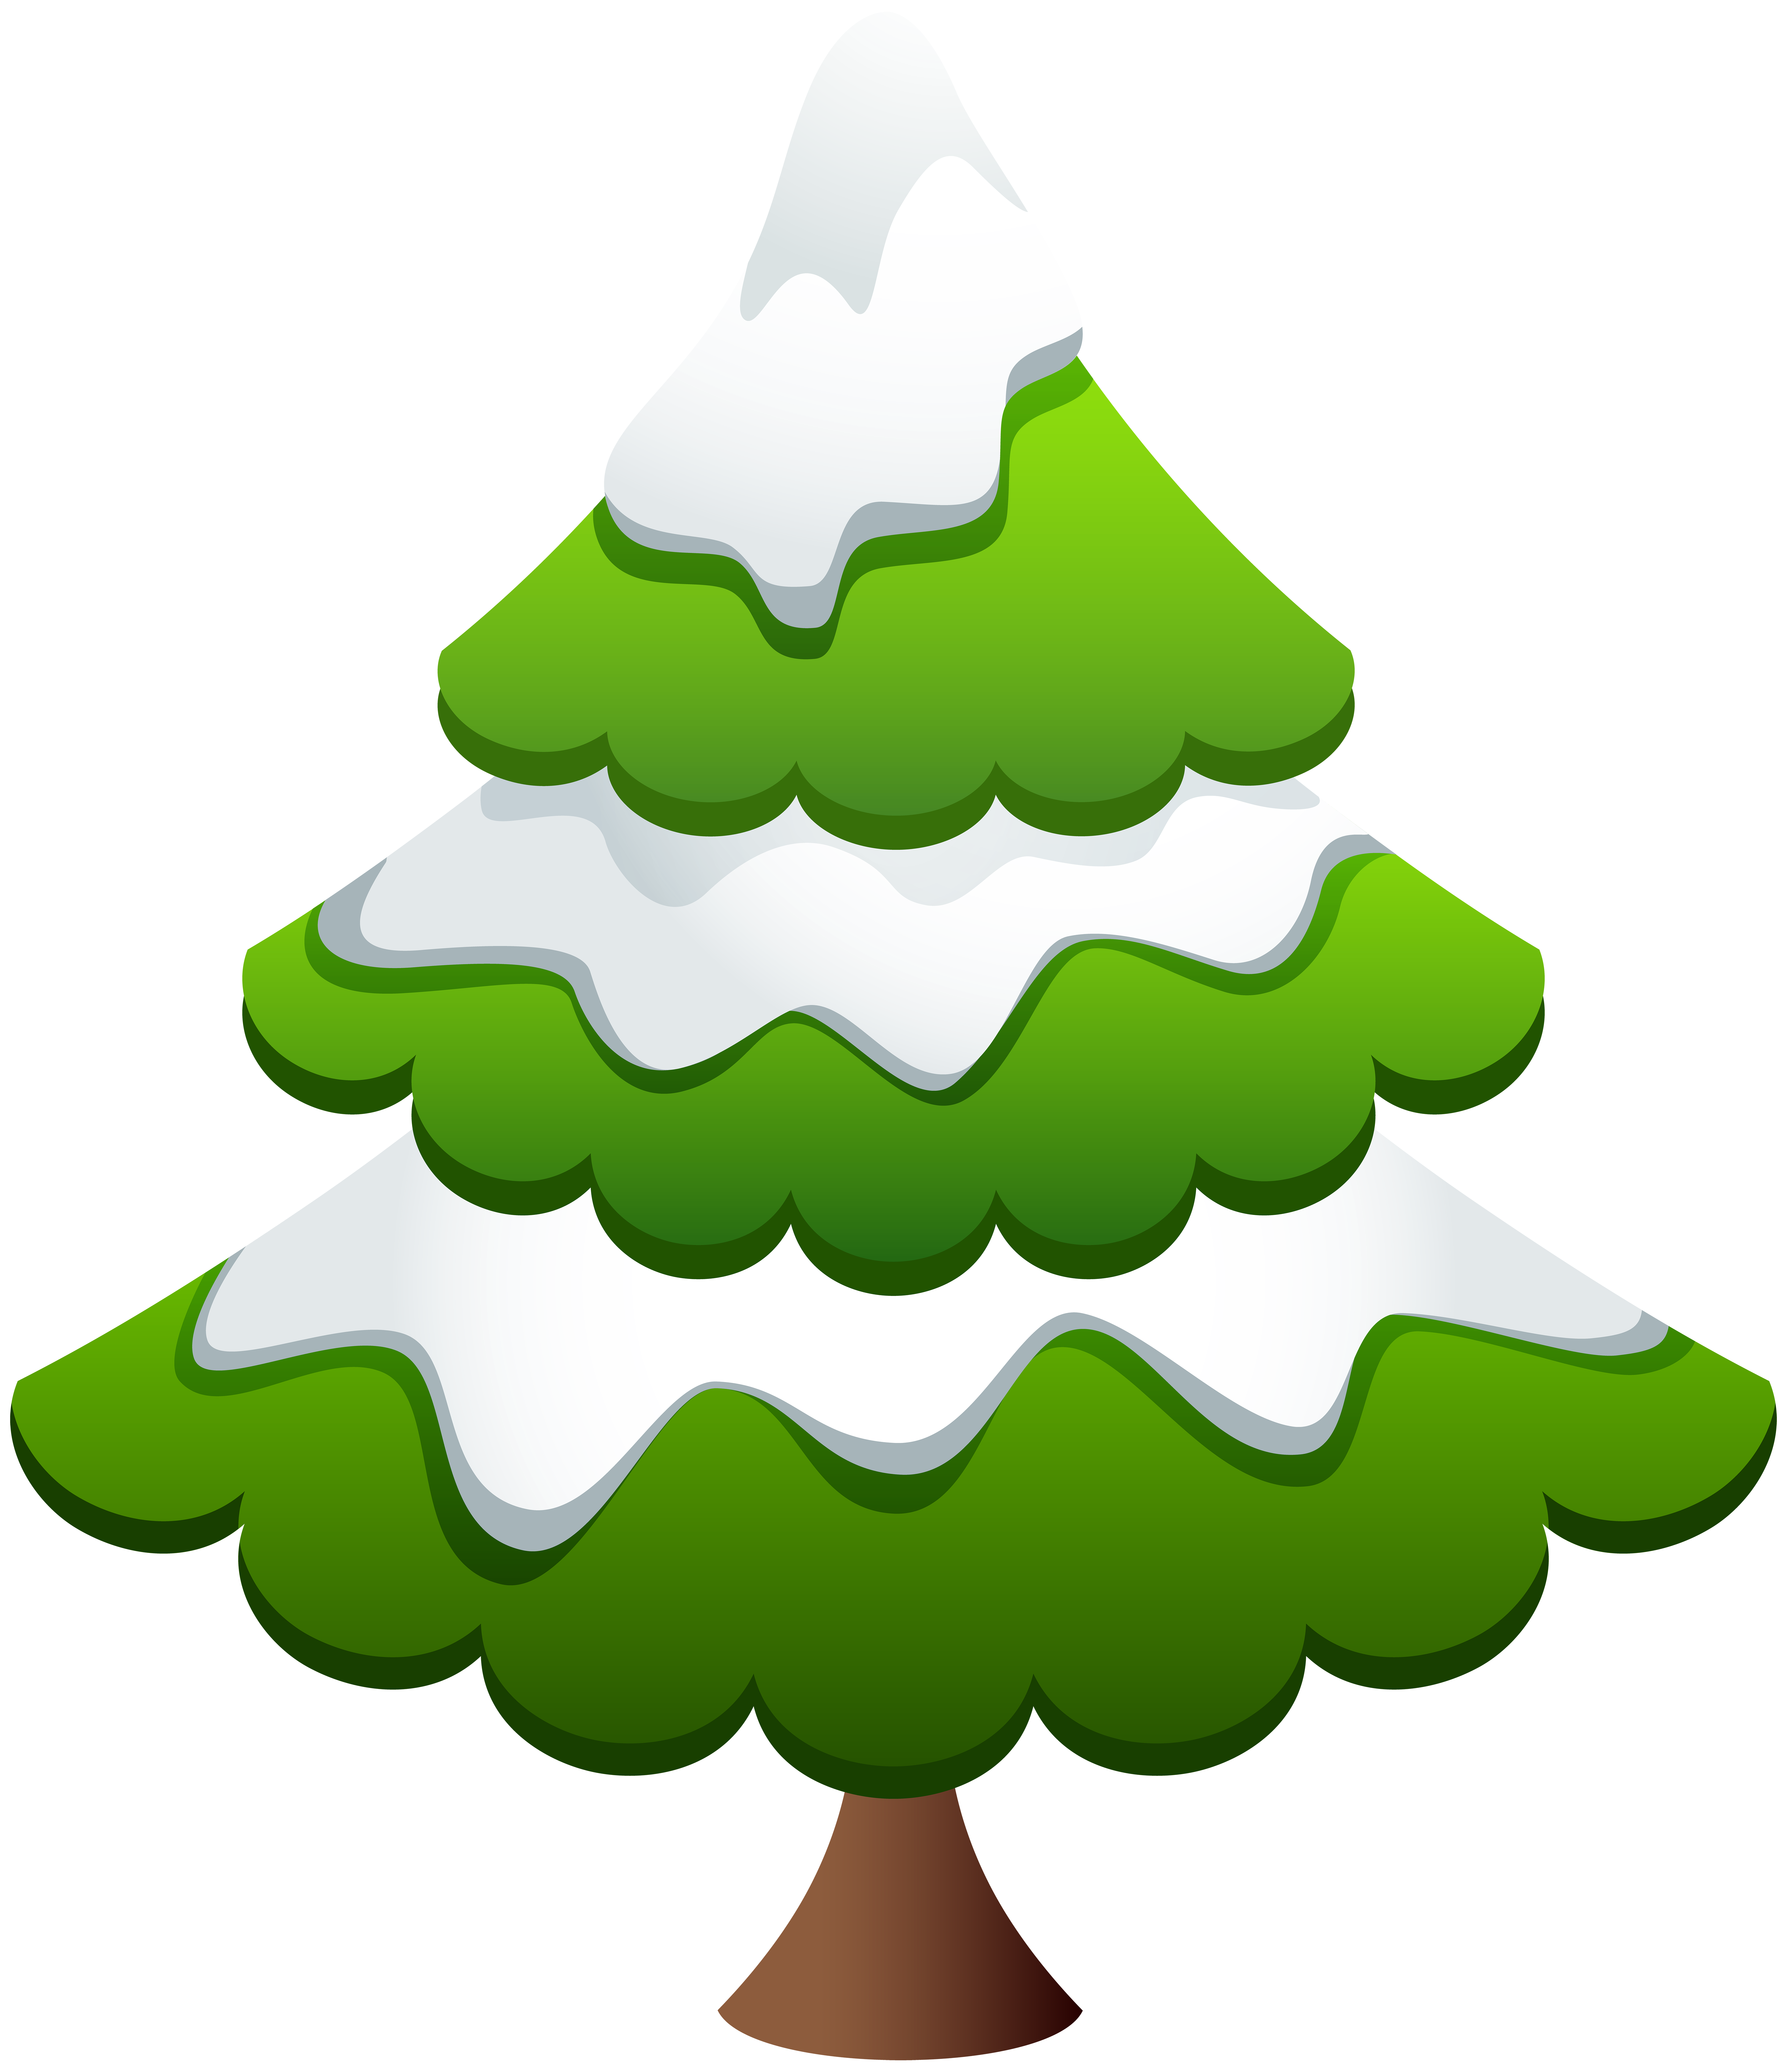 Winter Pine Tree Clip Art Image Gallery Yopriceville High Quality Images And Transparent Png Free Clipart Find & download free graphic resources for winter tree. gallery yopriceville